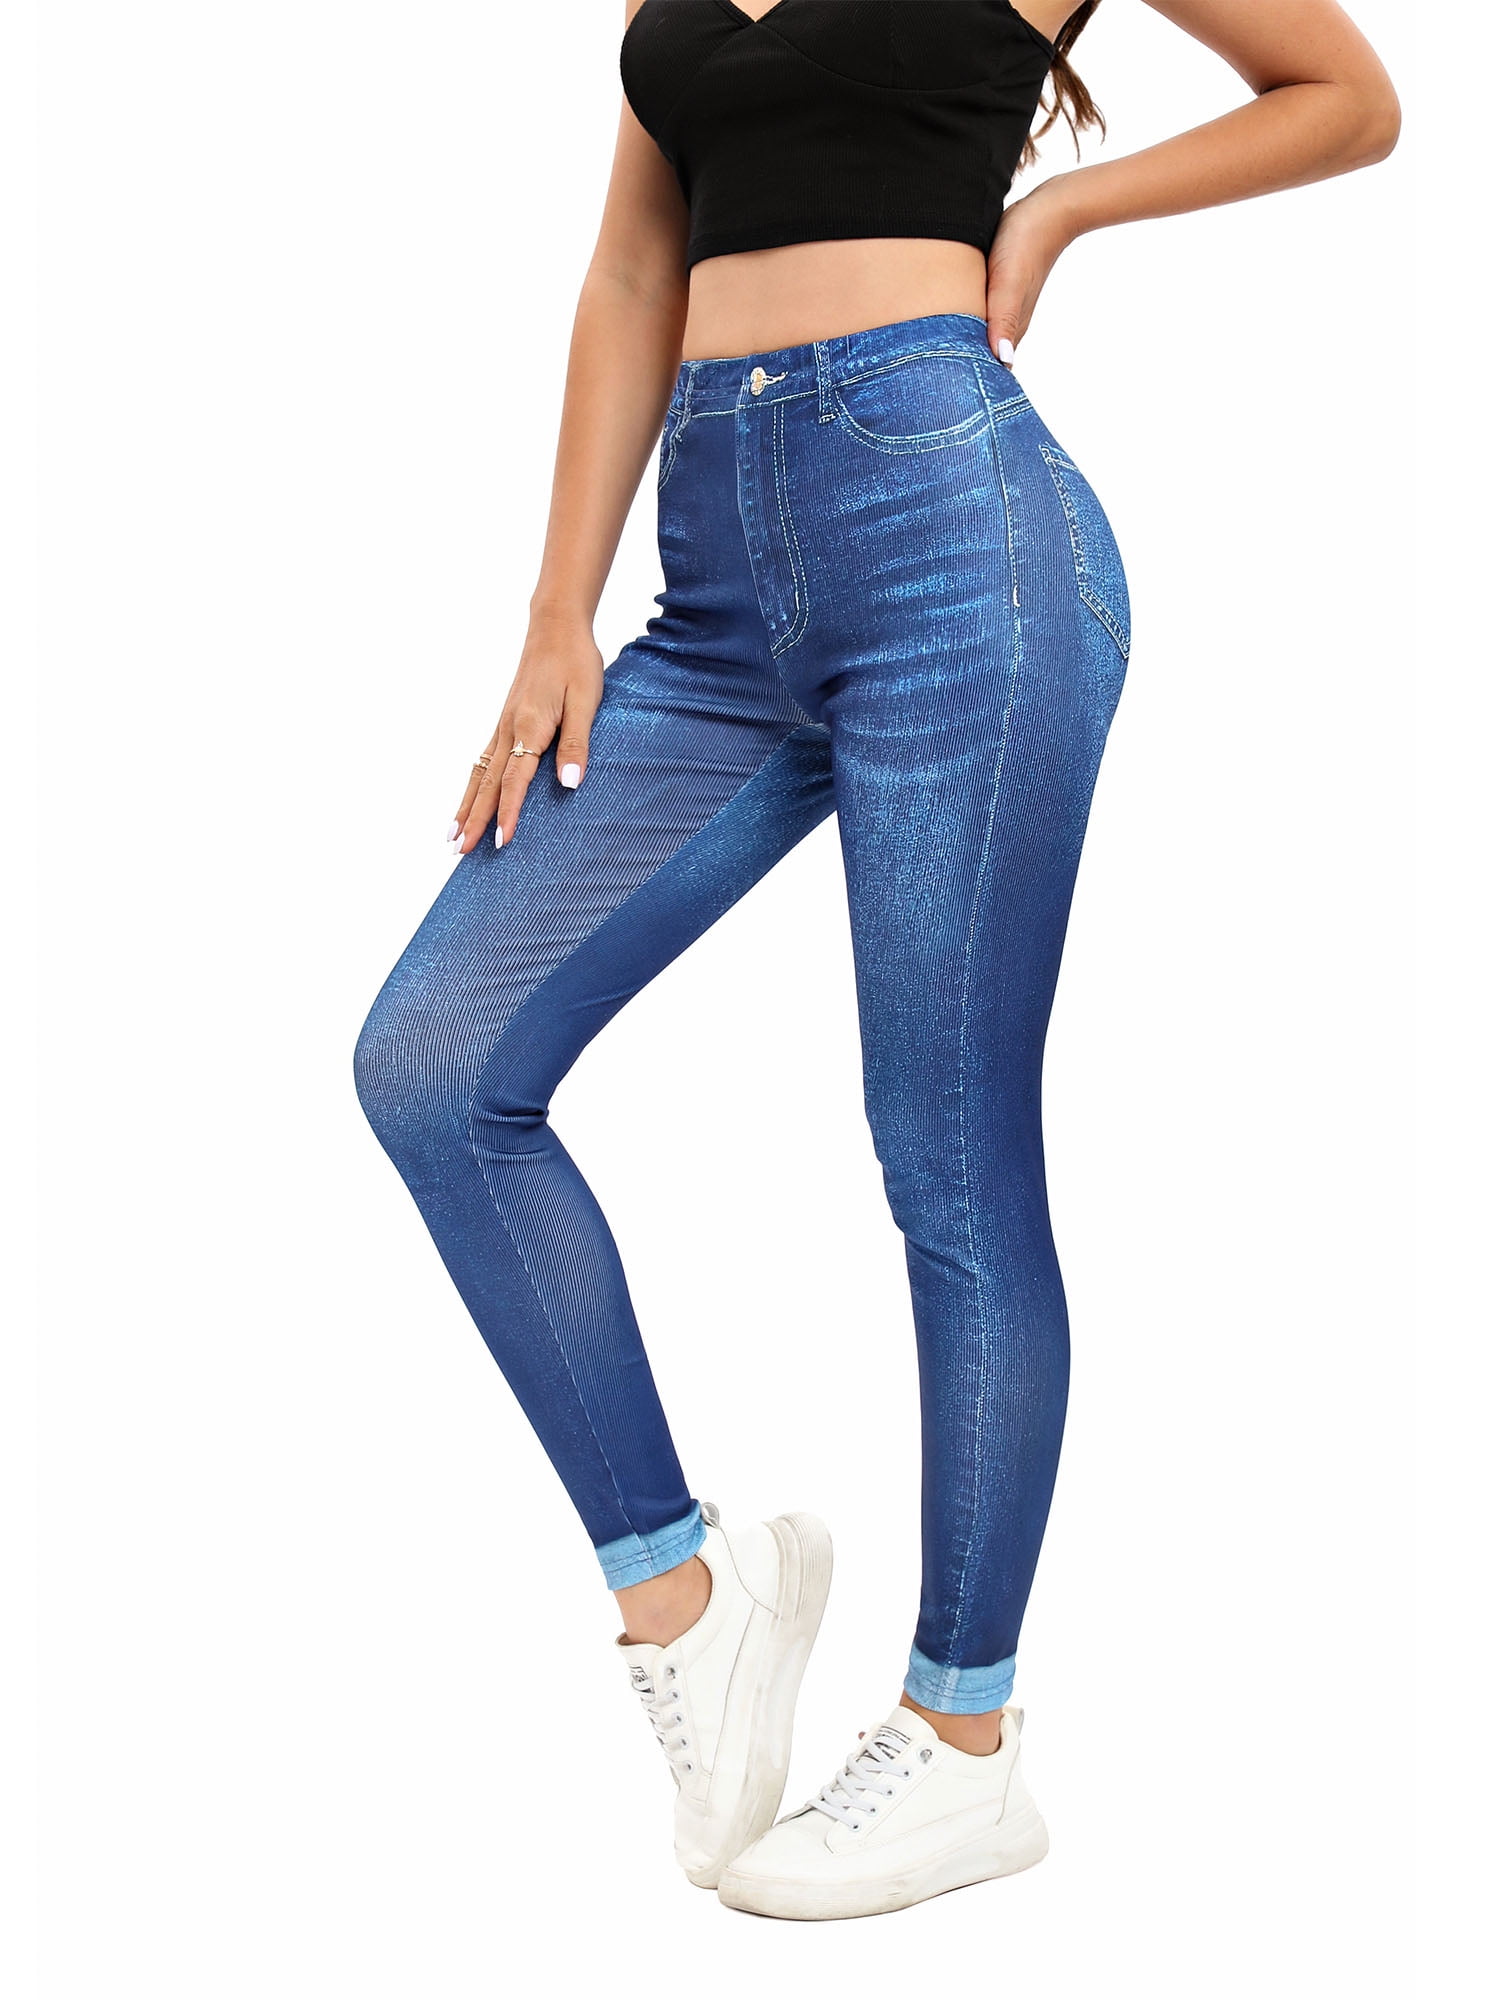 Frontwalk Jean Leggings for Women Printed Denim High Waisted Yoga Pants  Stretch Jean Look Jeggings Tights Blue-B M